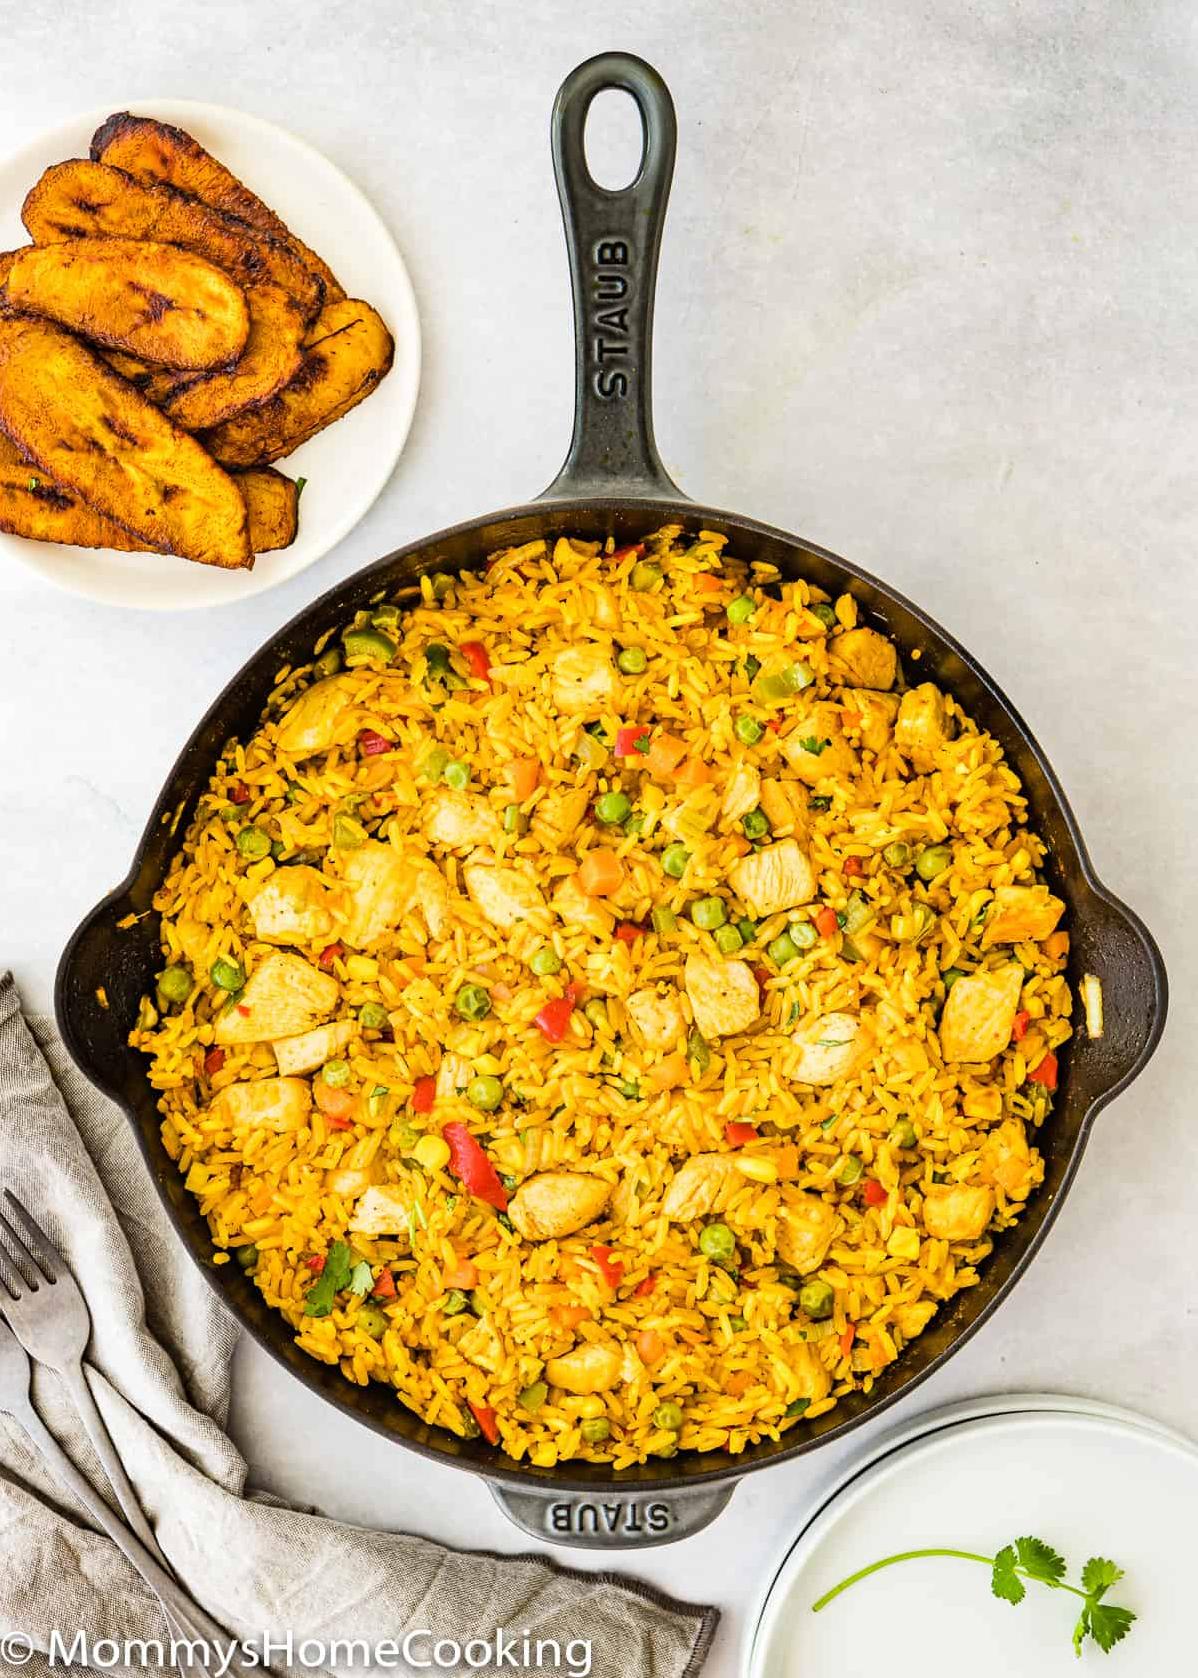  This dish is as colorful and vibrant as the Latin American culture it originates from!